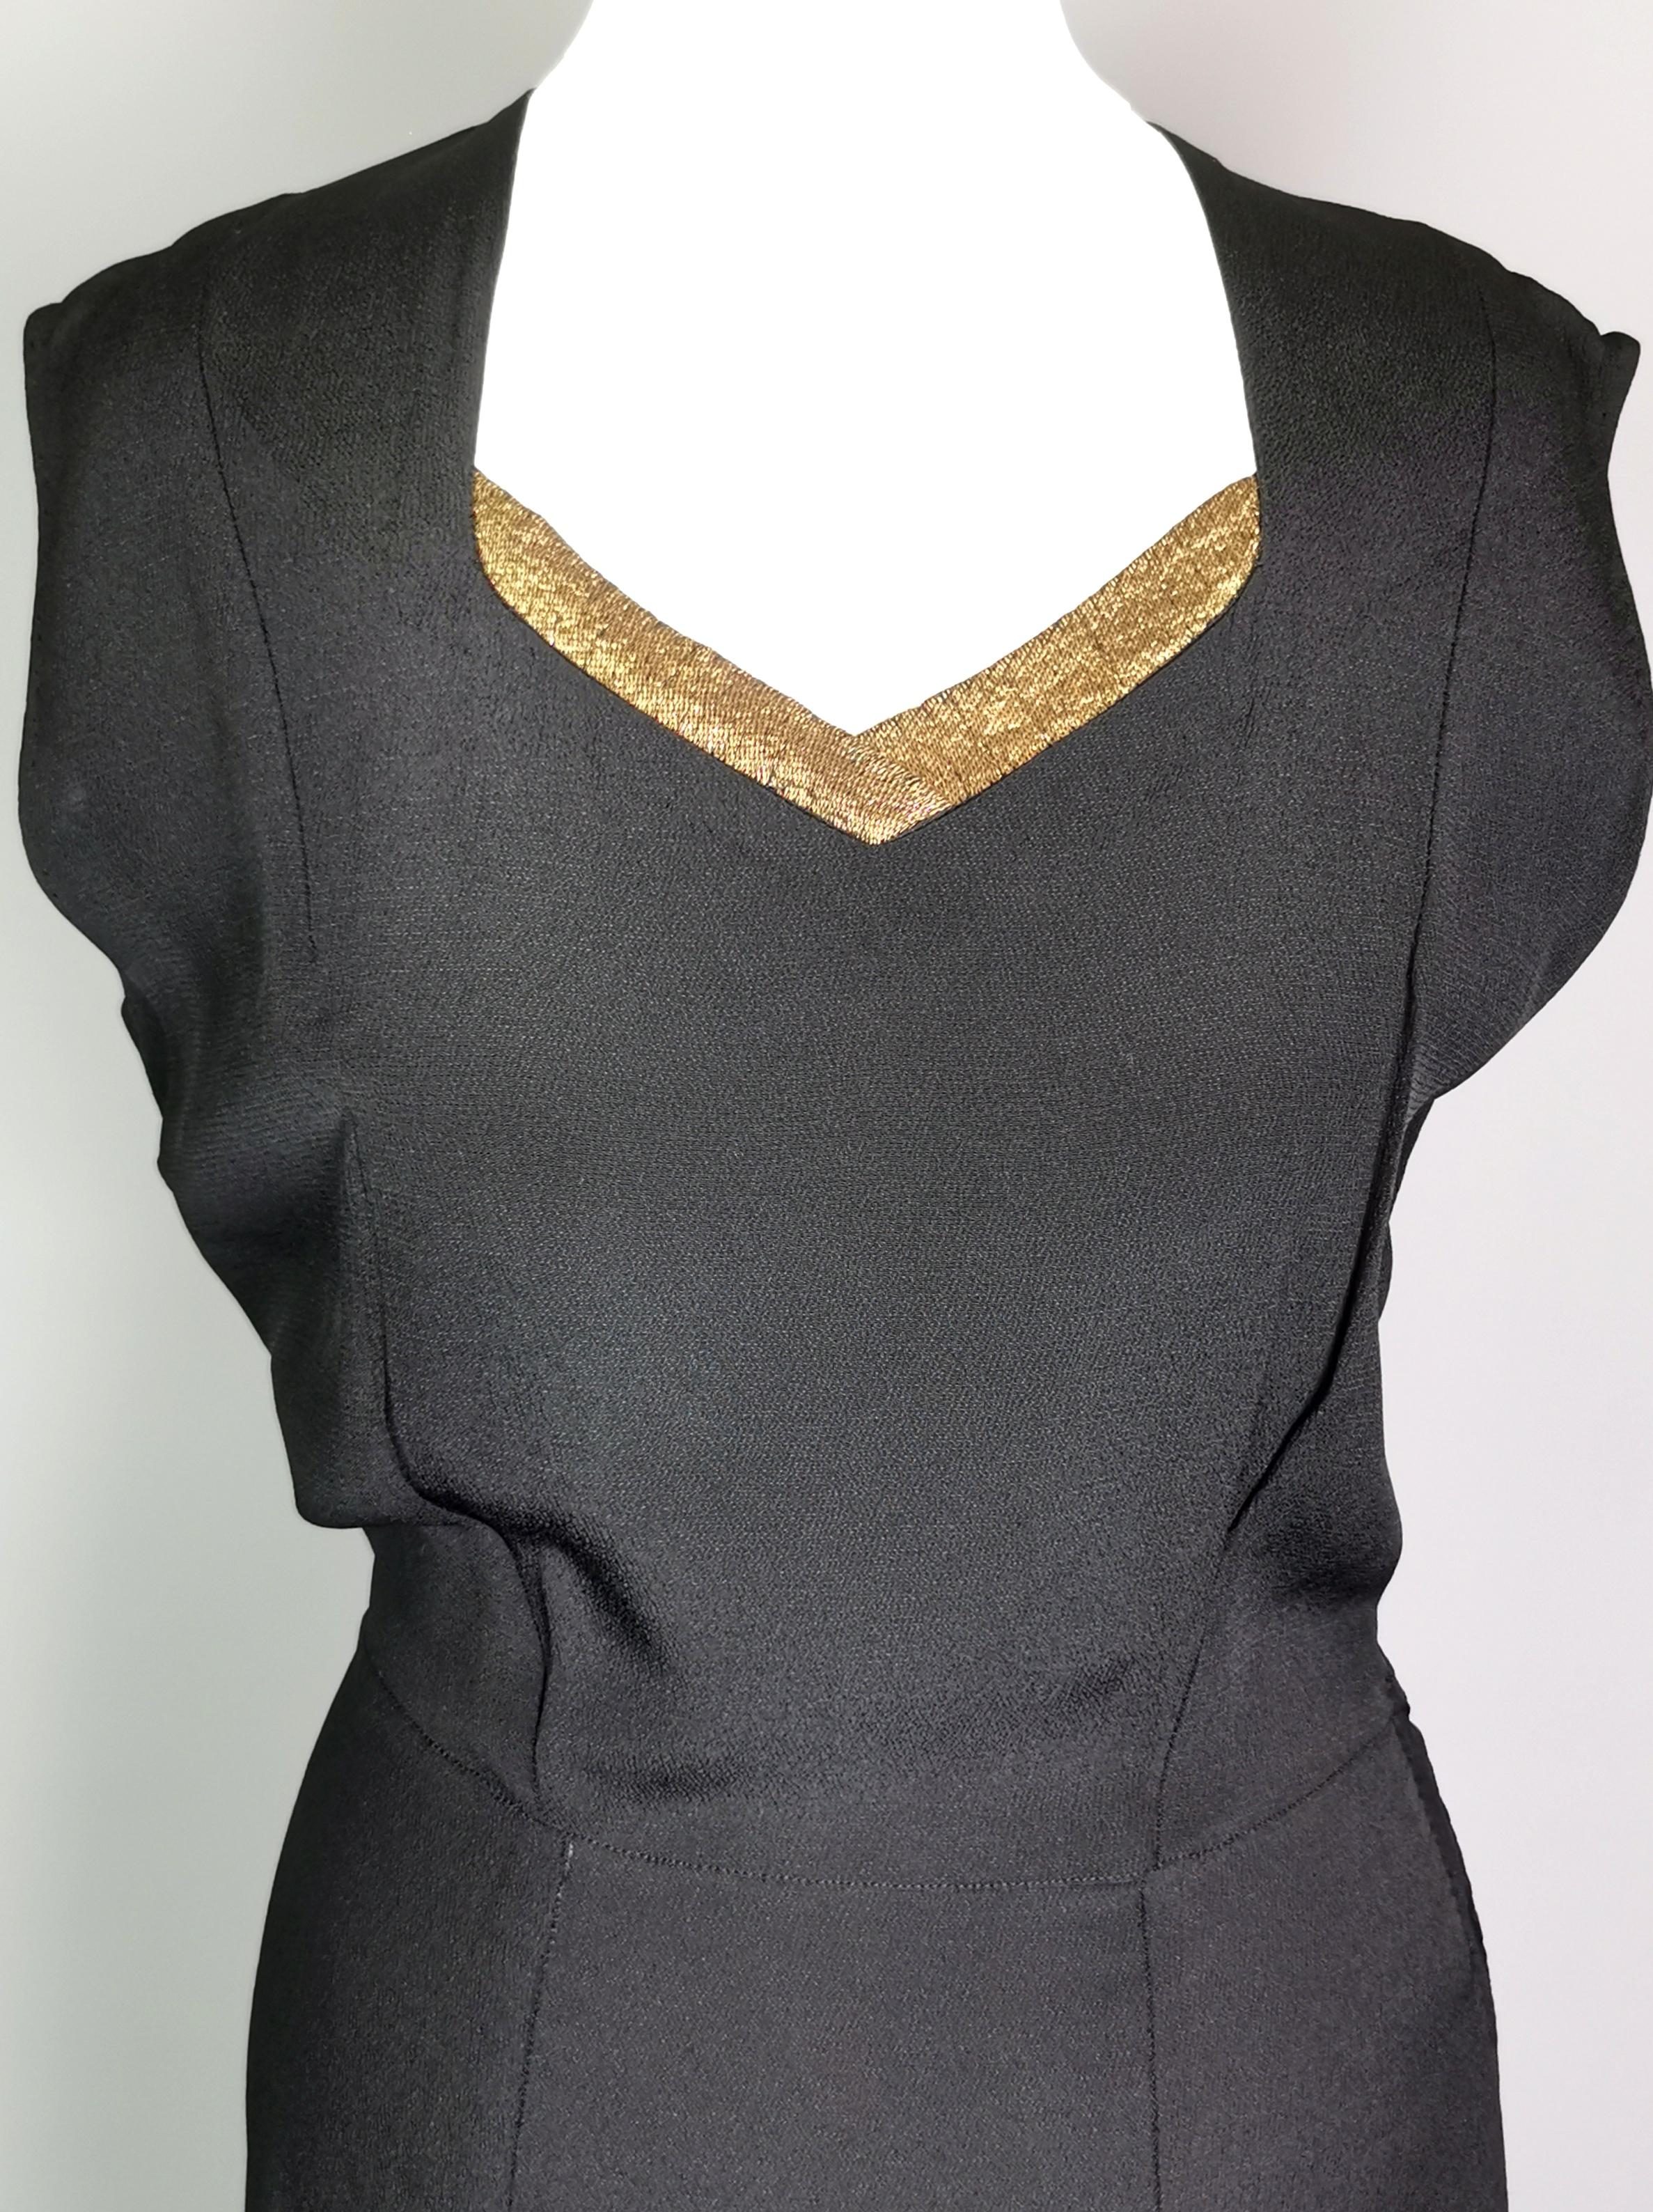 A gorgeous vintage 1930's Black bombshell evening dress.

A slinky black crepe rayon dress with a v neck, cinched in at the waist with a long skirt and a gold lame trim neckline.

It has a figure hugging silhouette with some stretch to the material,